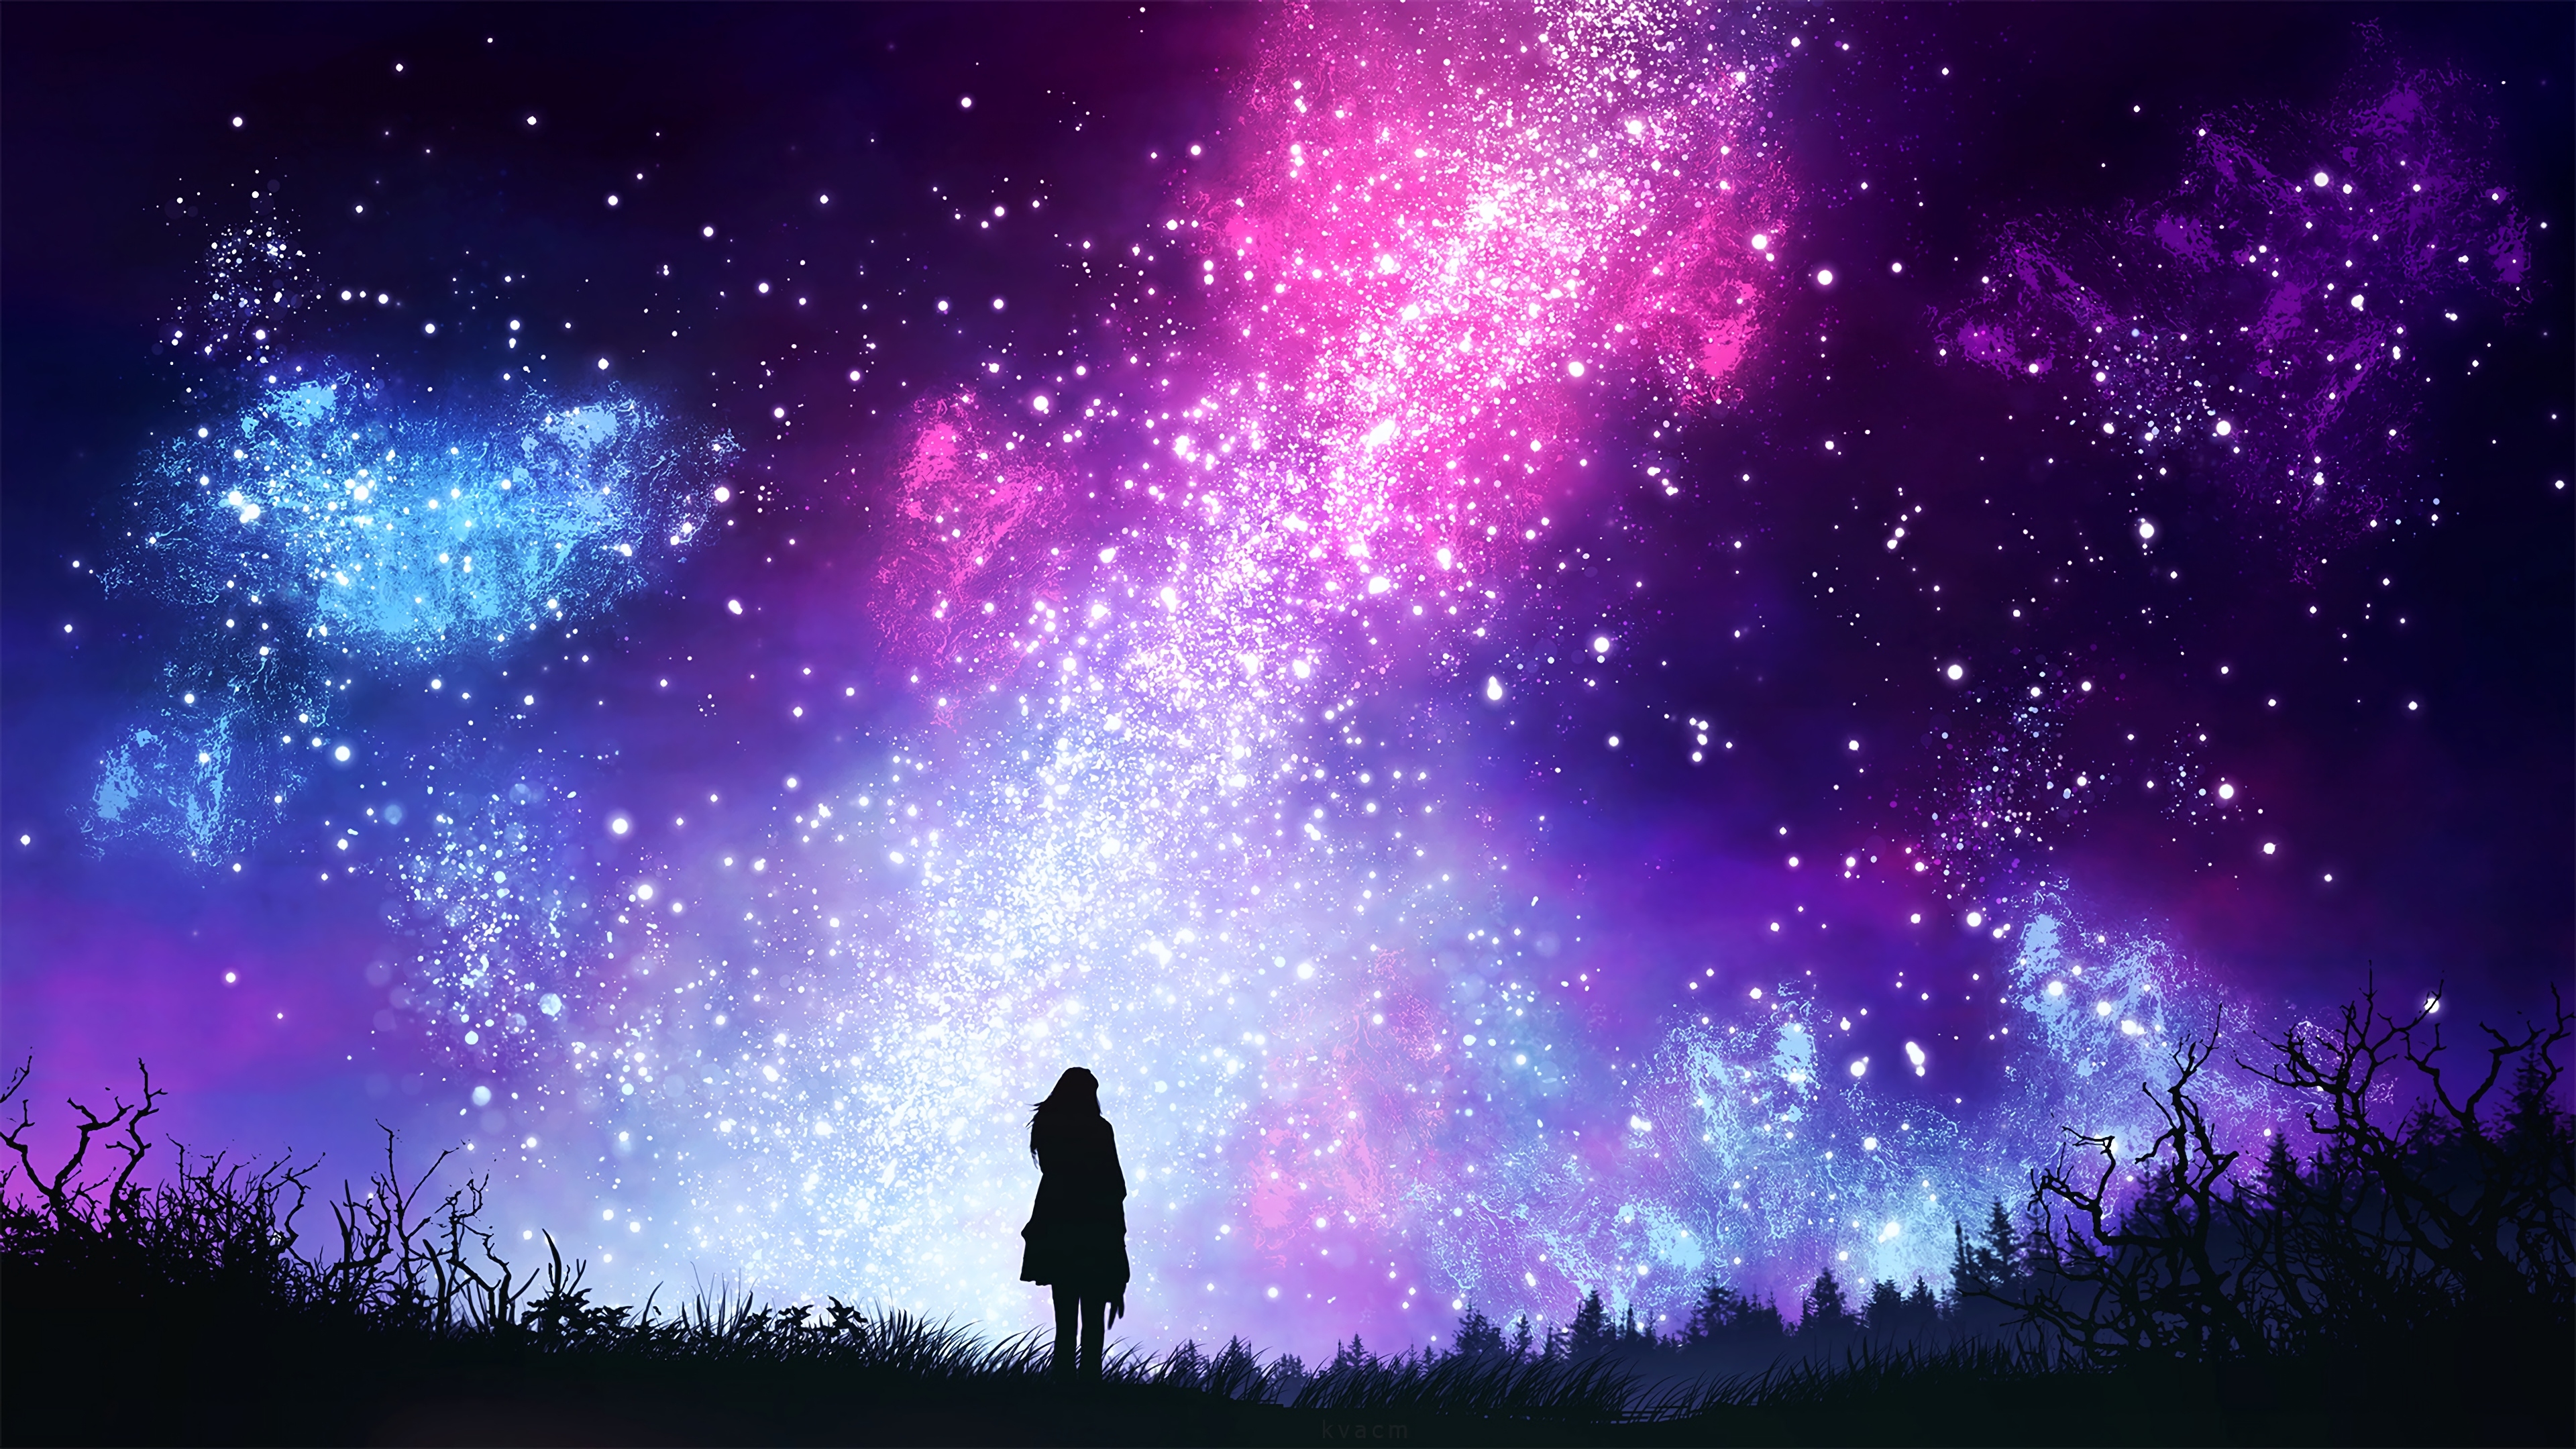 The silhouette of a girl against a magical sky.